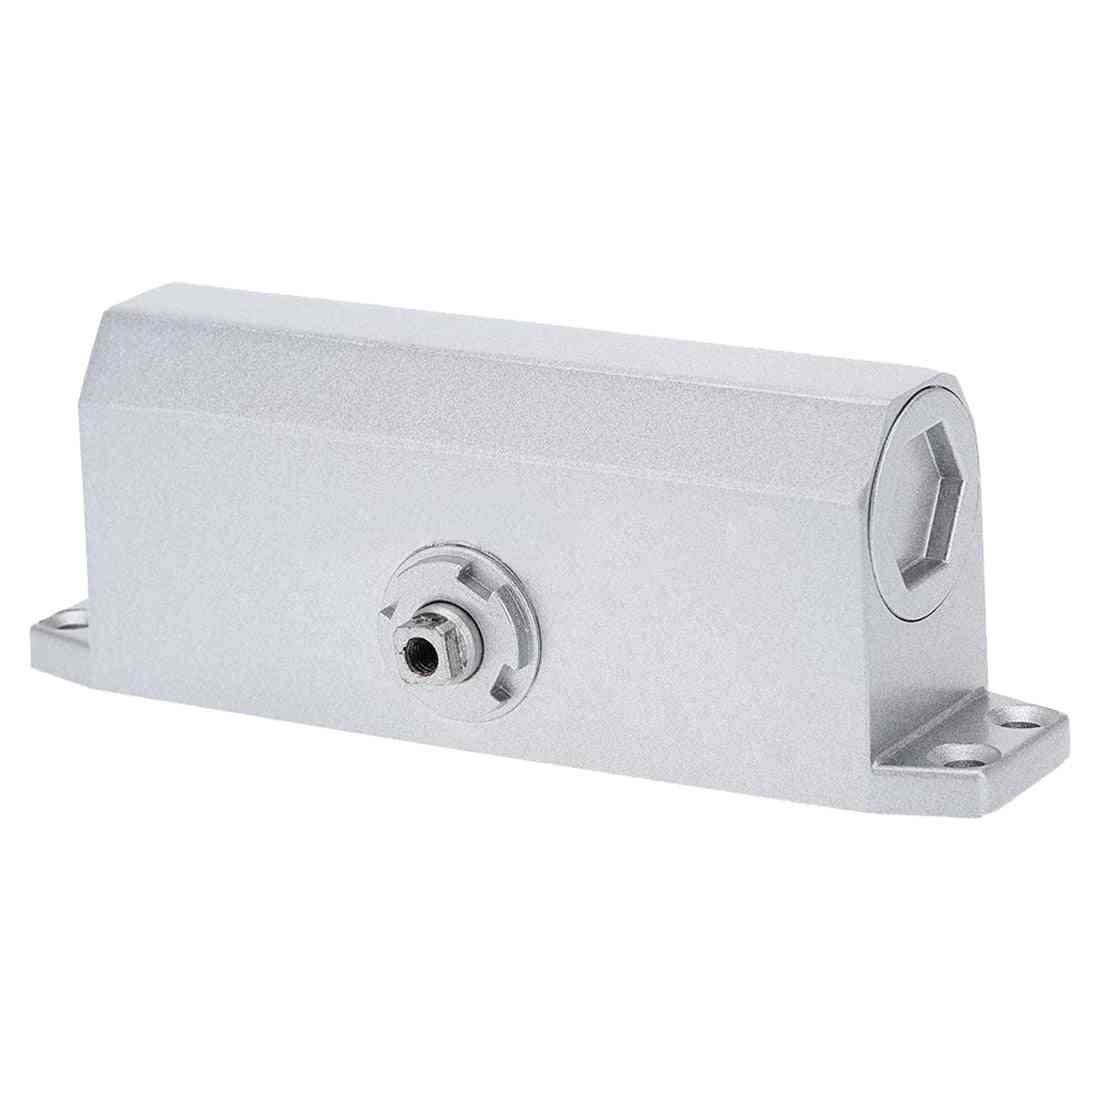 45-65kg Automatic Heavy Duty Fire Rated Door Closer